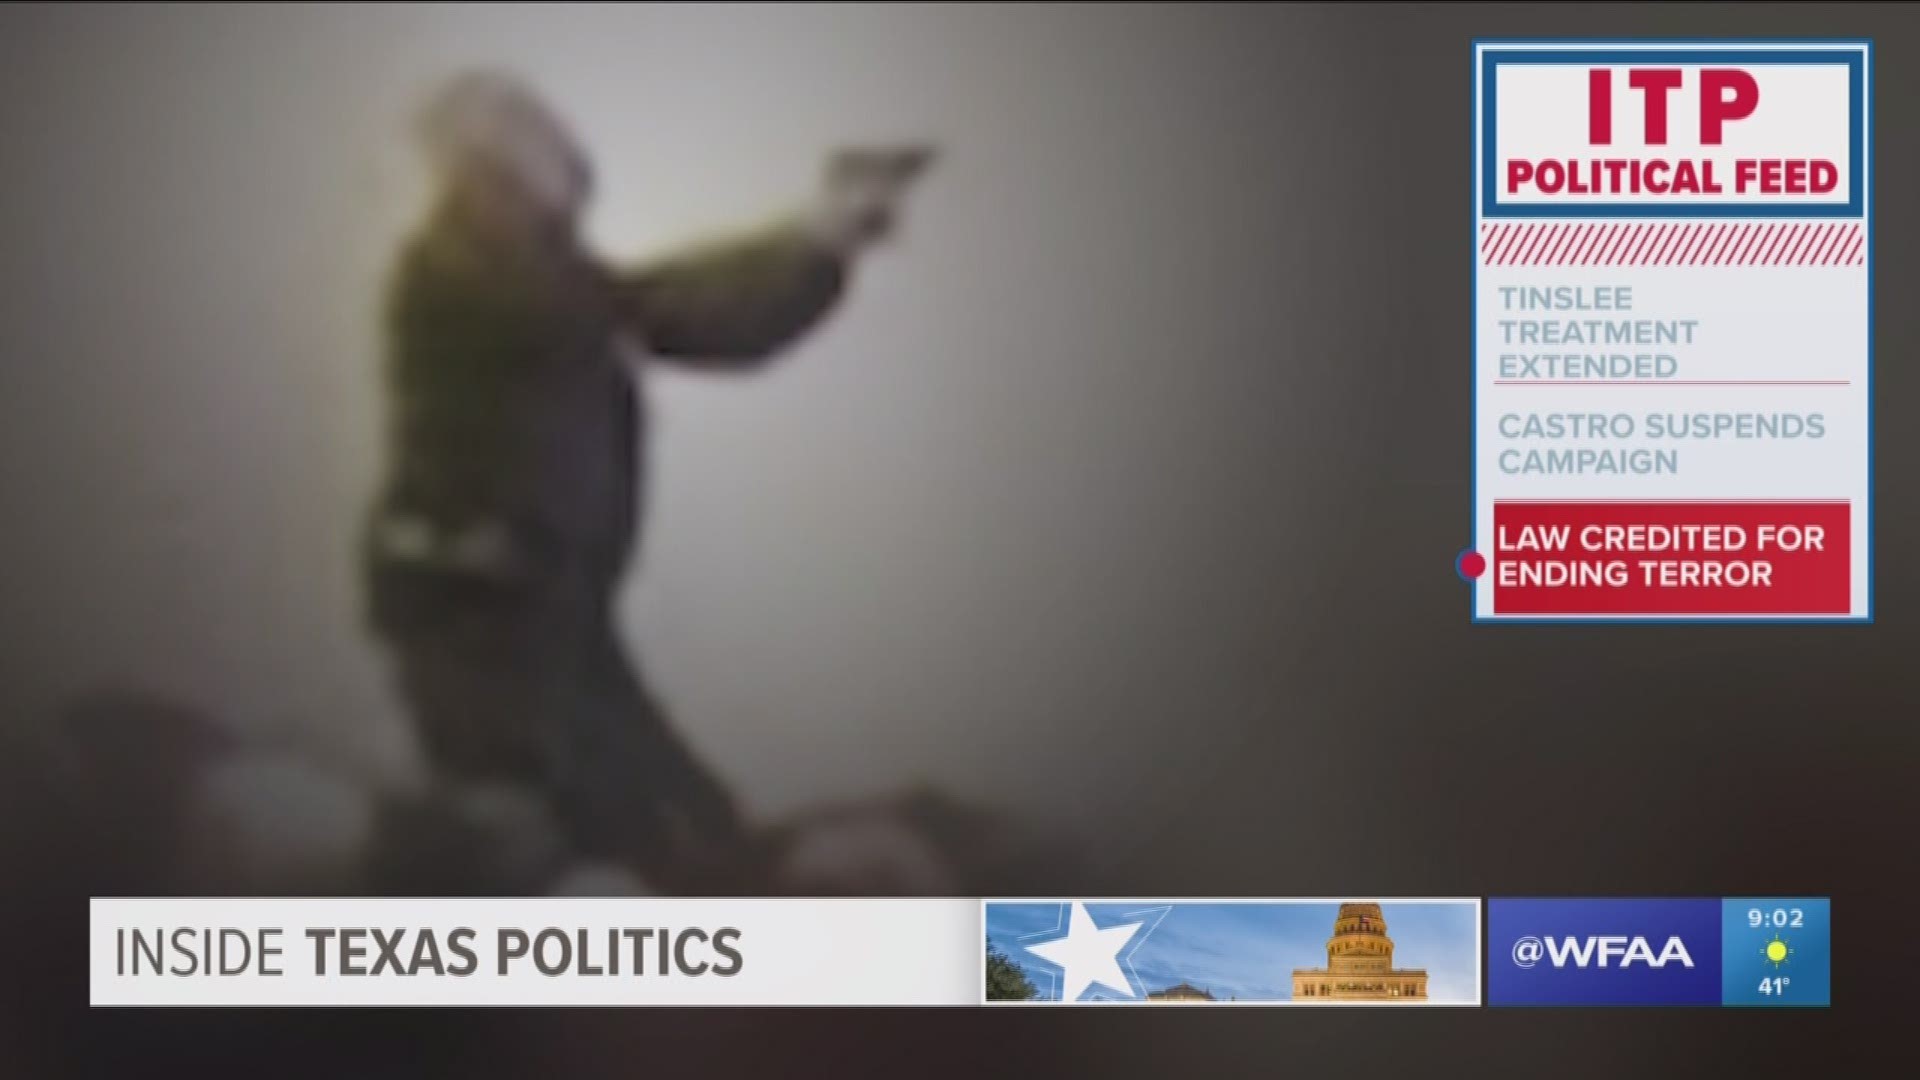 Host Jason Whitely provides a quick recap of some of the top stories in politics this week in Texas.